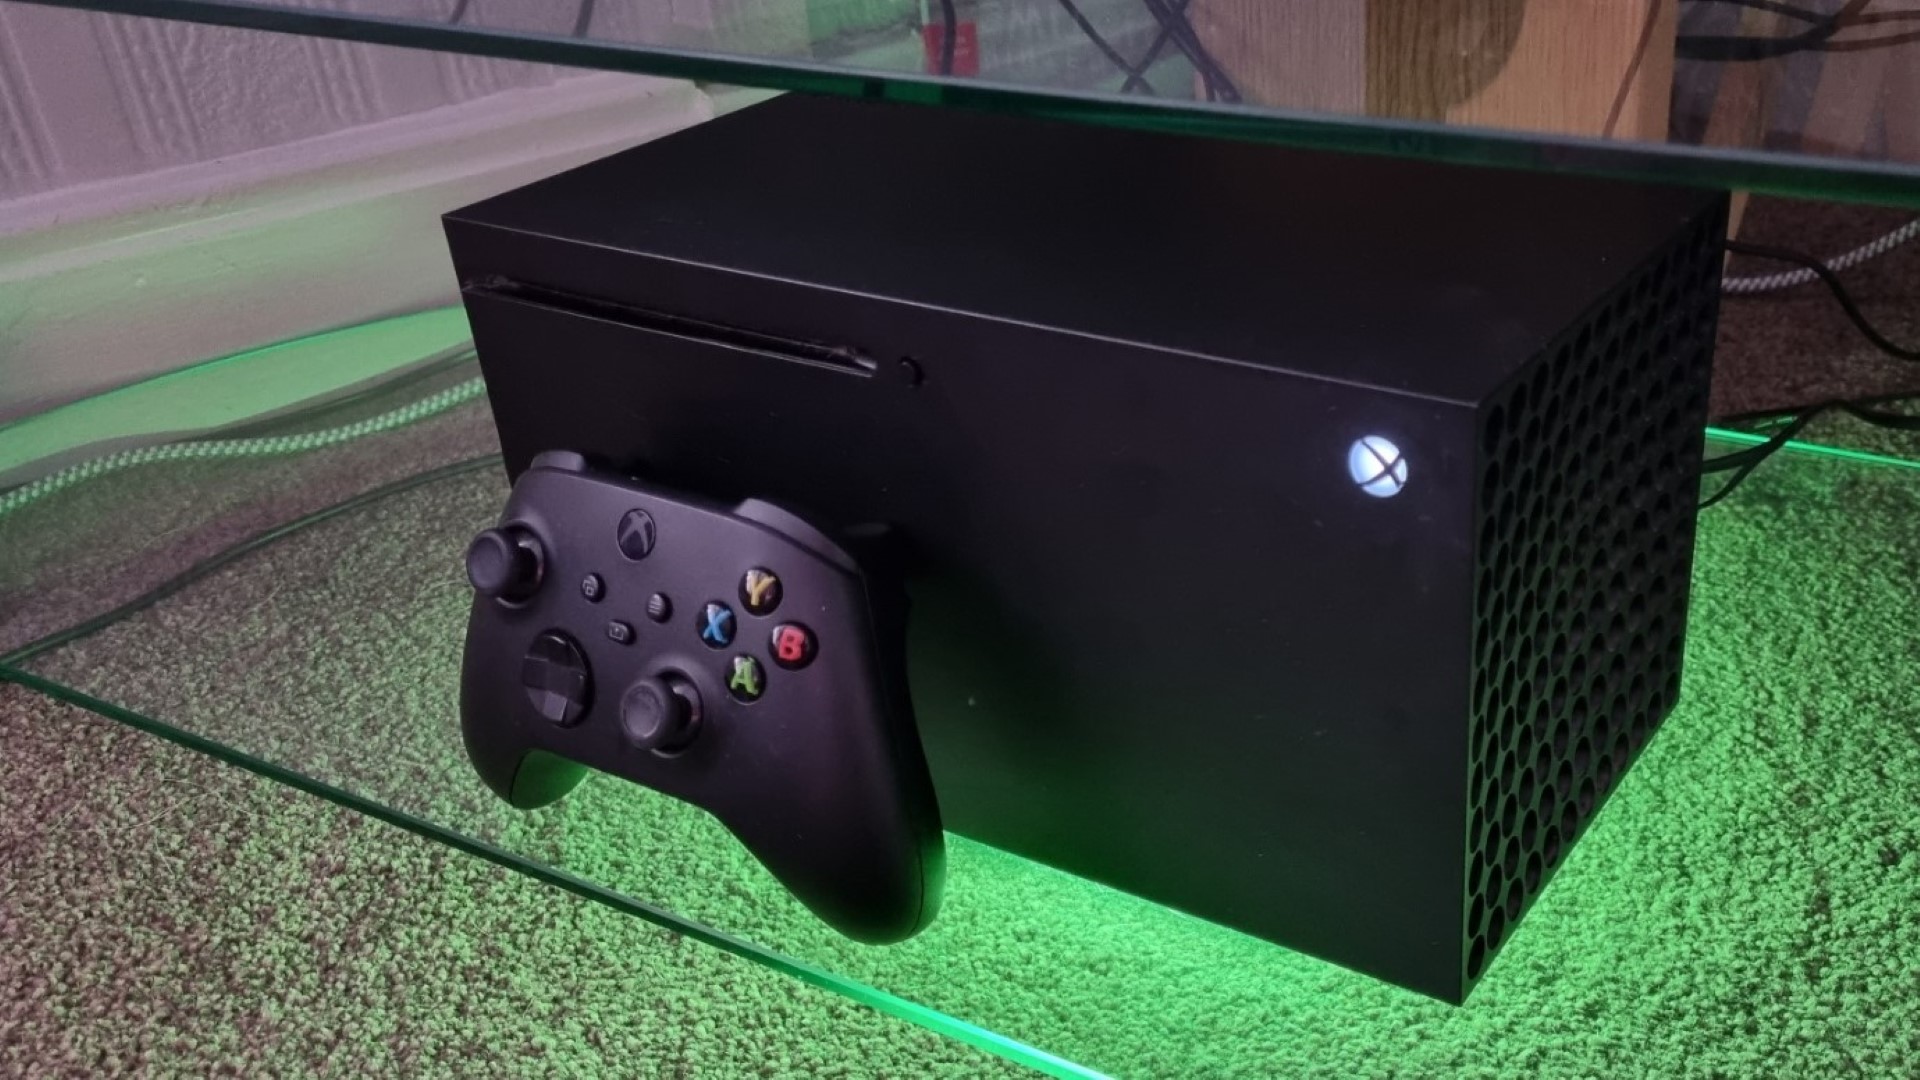  Xbox Series X Console (Renewed) : Video Games